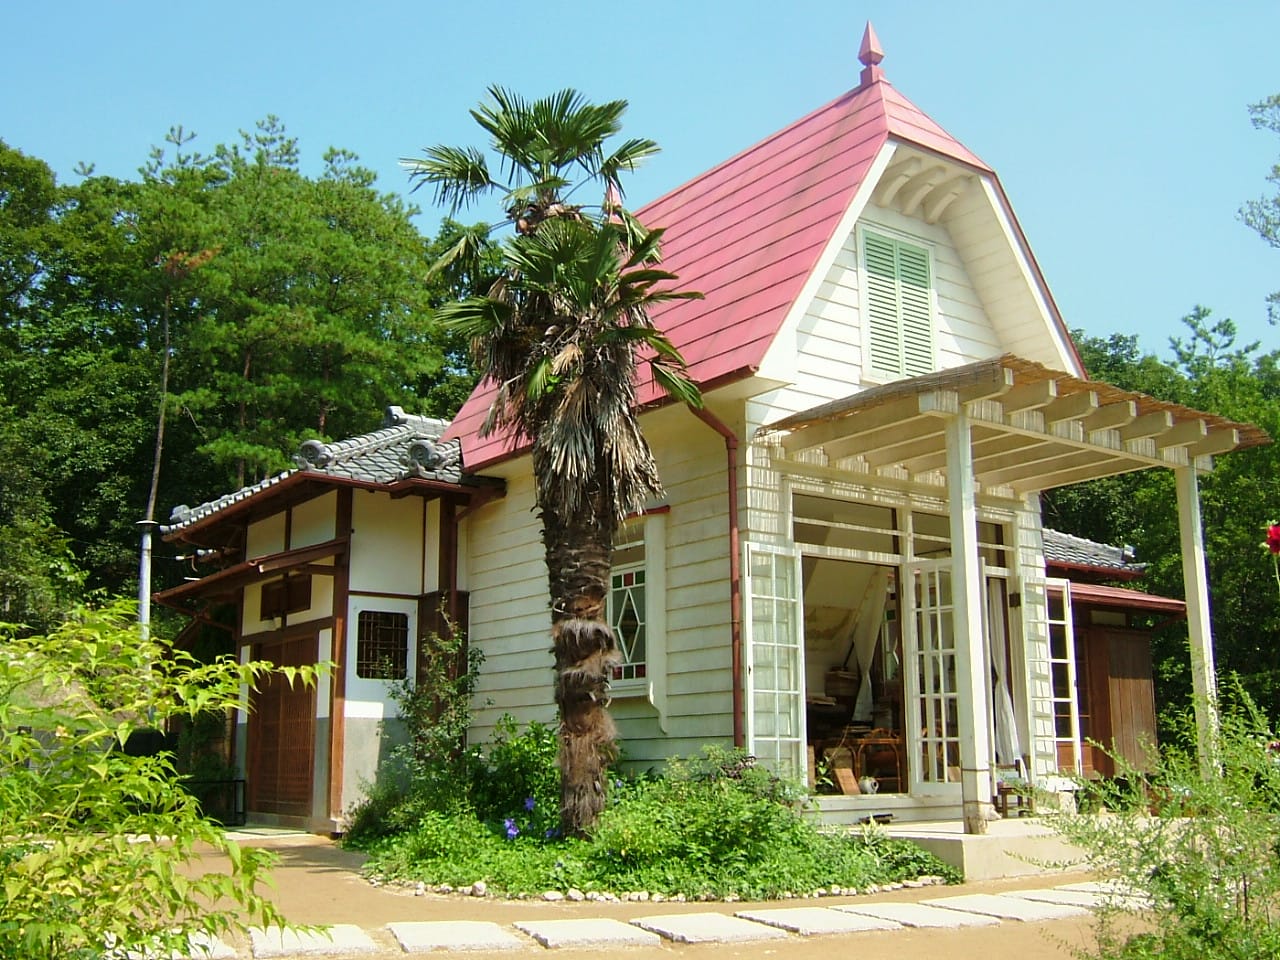 Satsuki and Mei’s House at Ghibli Park